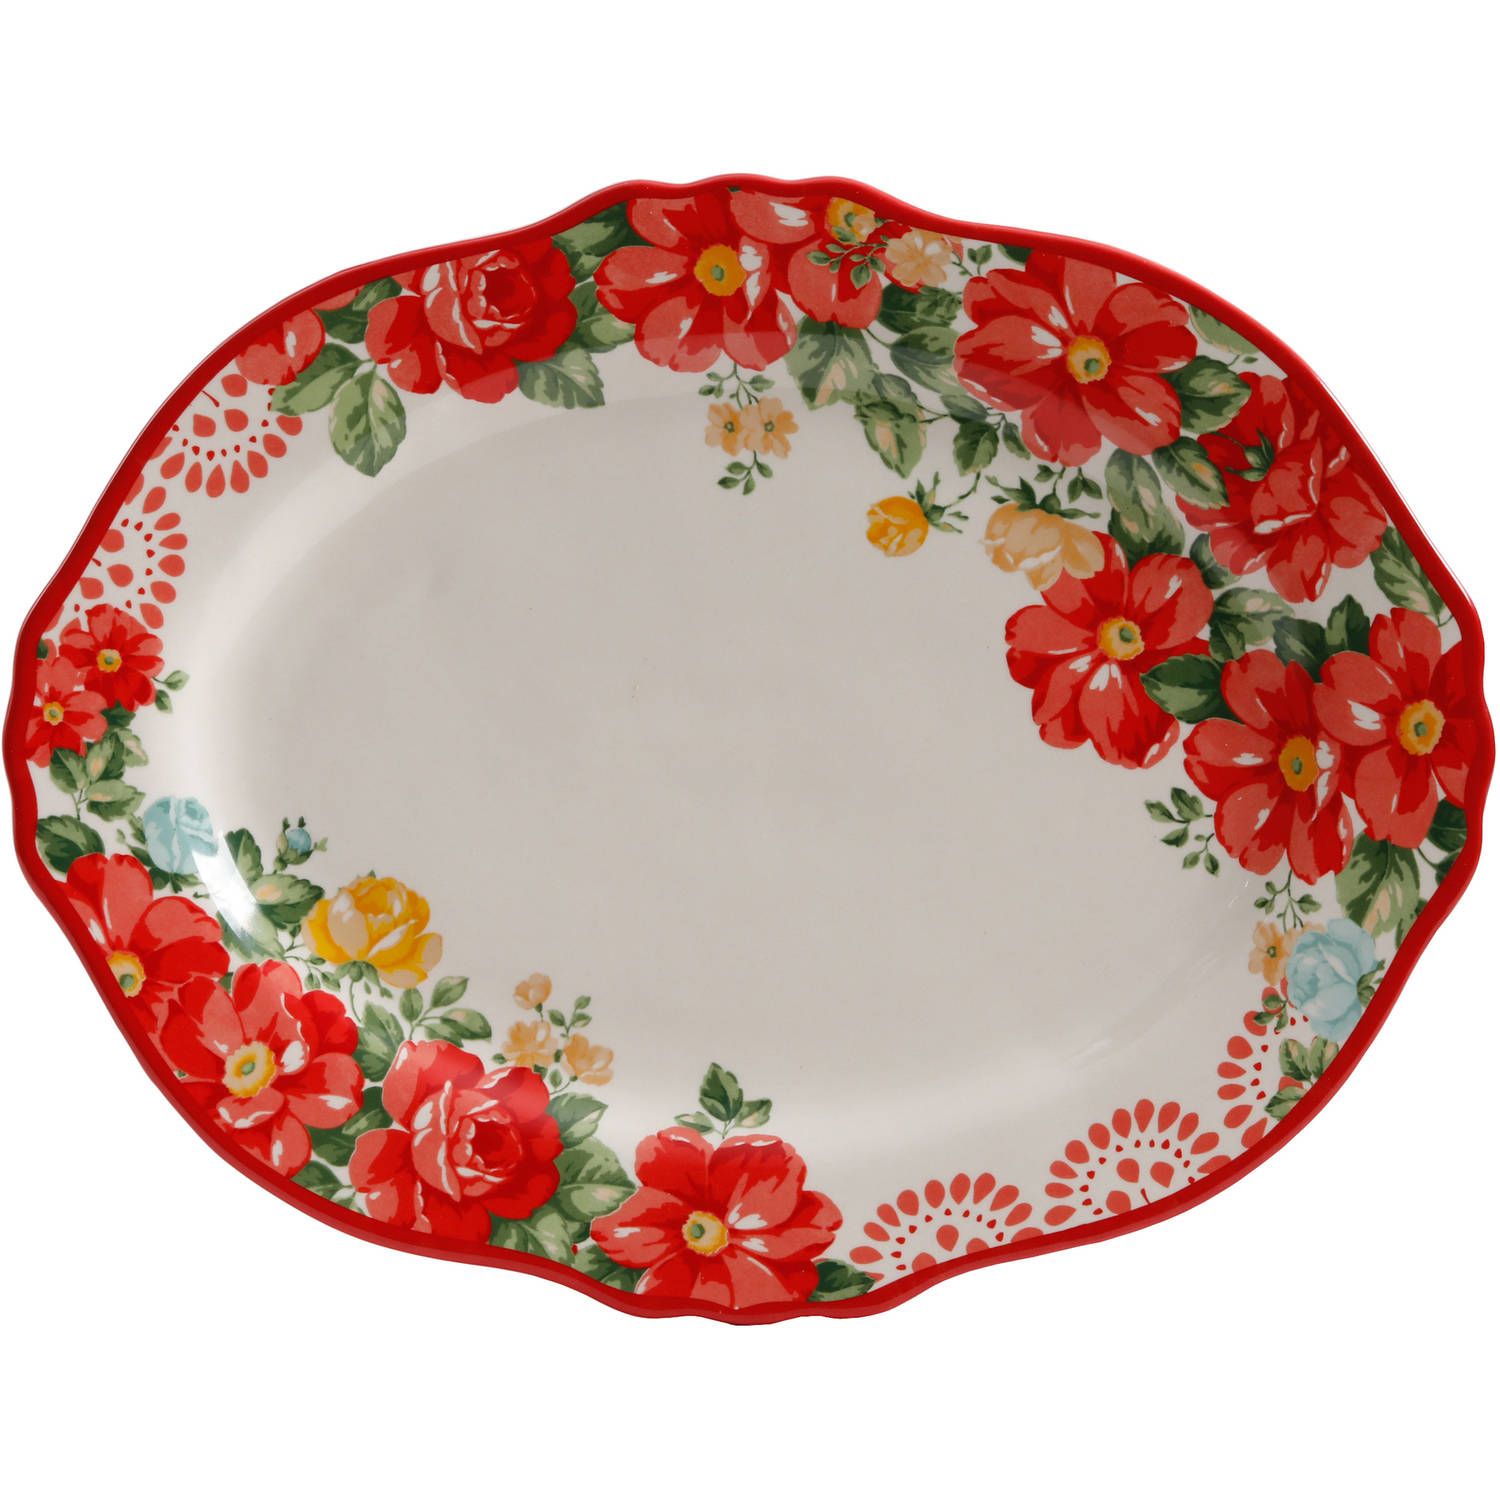 The Pioneer Woman Floral Platter